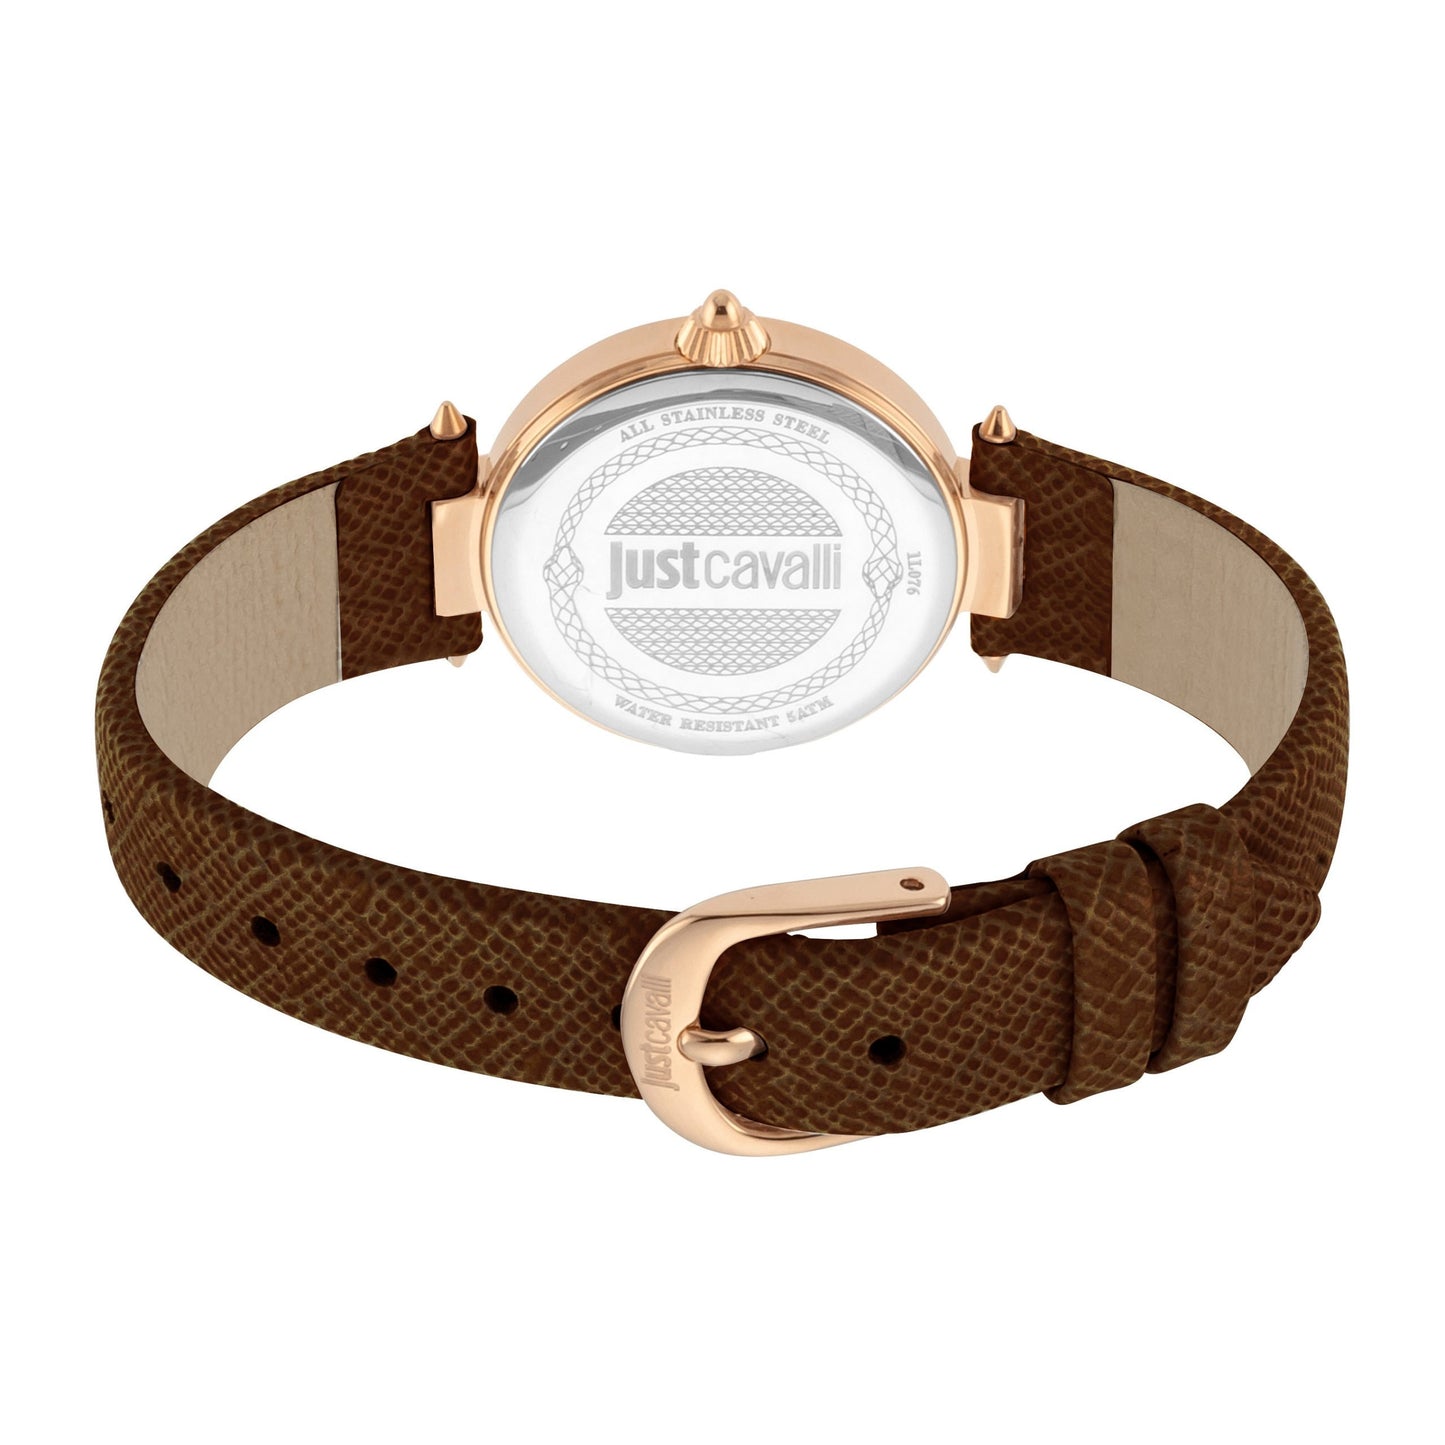 JUST CAVALLI Infamay Leather Chocolate Brown Watch